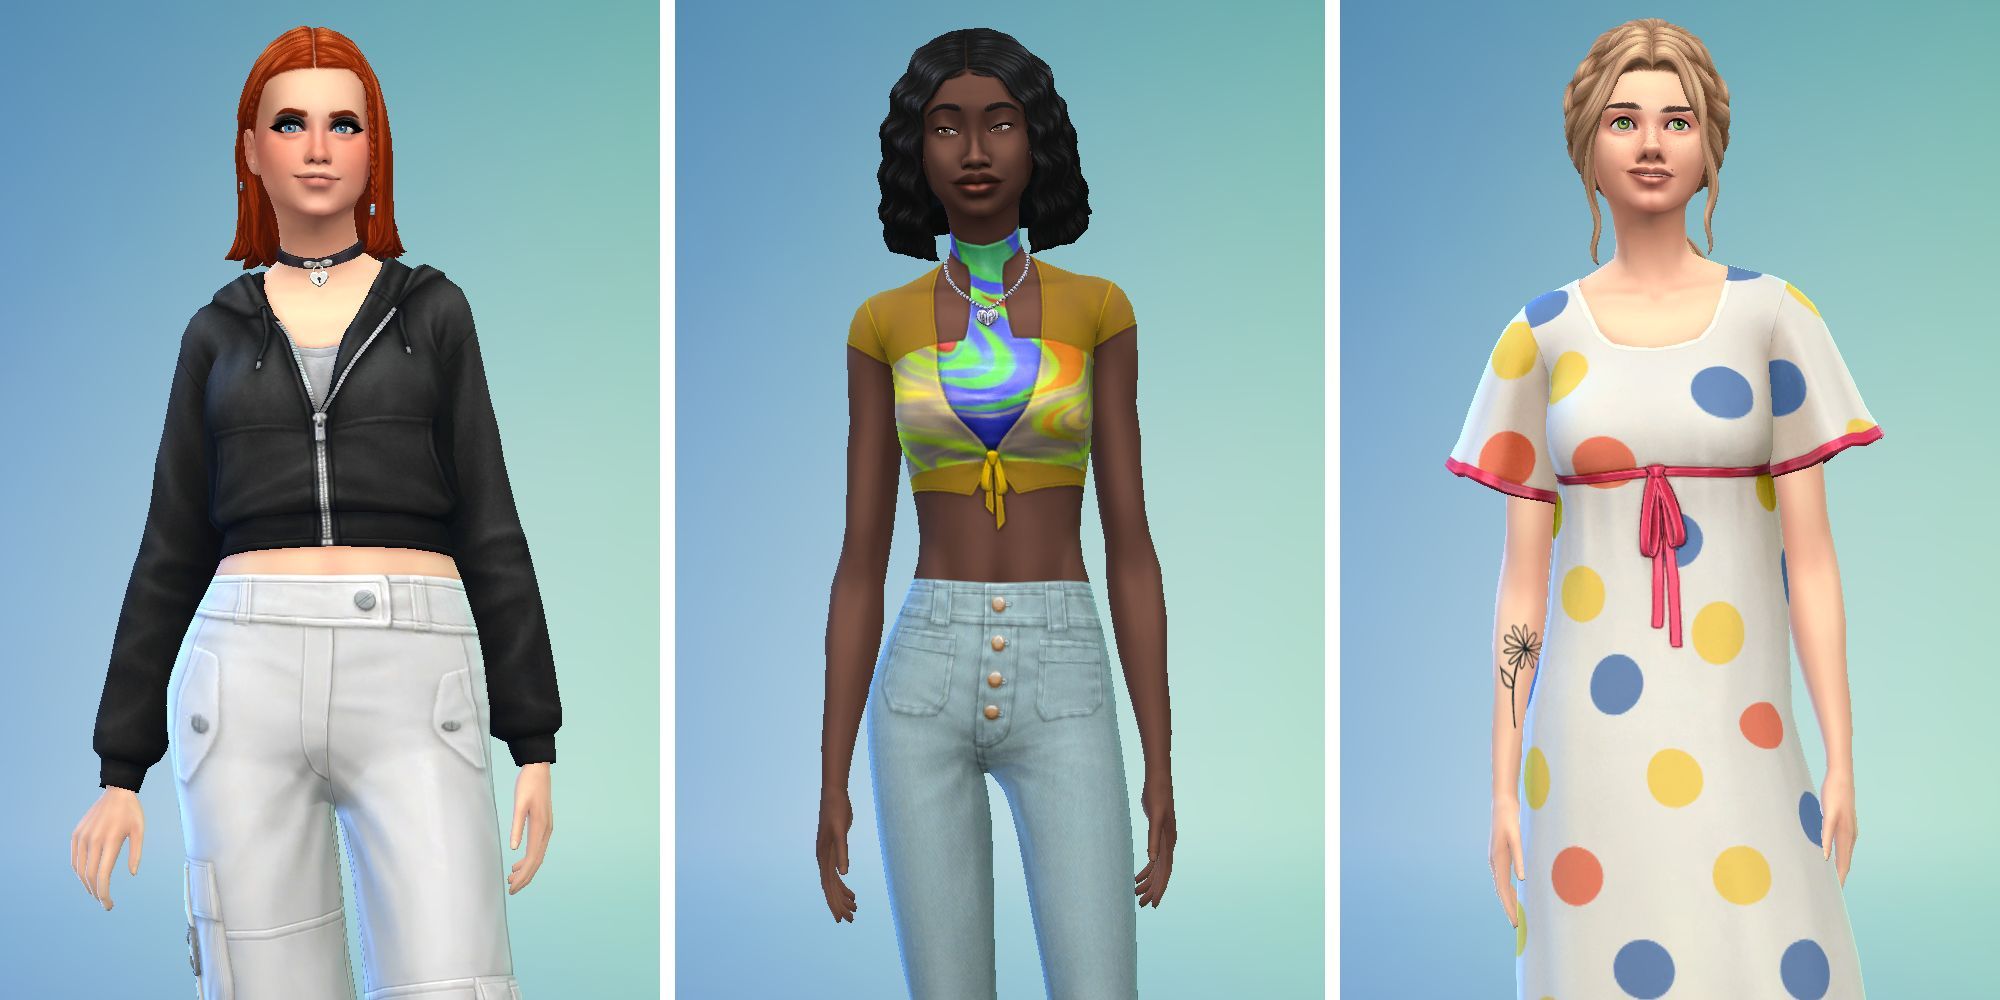 Three images of Sims in Create A Sim. One in a black hoodie and white pants, another in a tie dye top and jeans, and a Sim in a polka dot dress